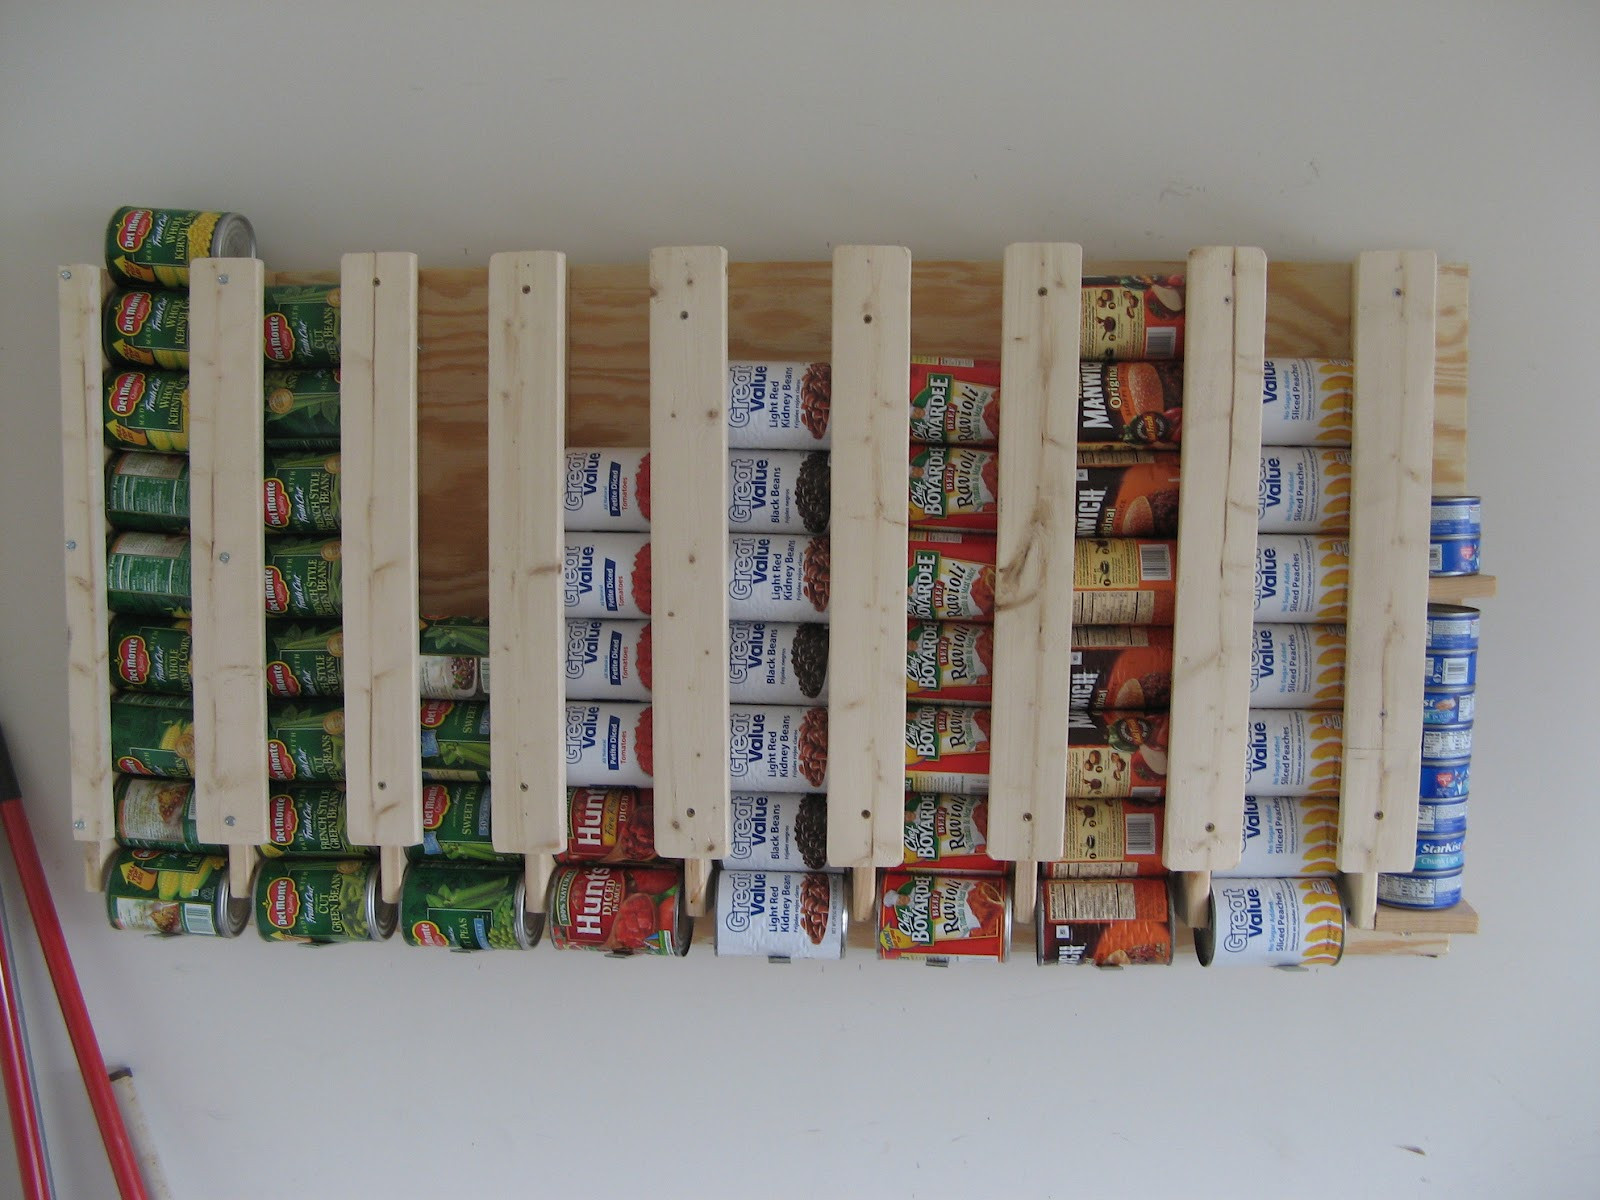 Canned Food Organizer DIY
 DIY Canned Goods Storage The Prepared Page